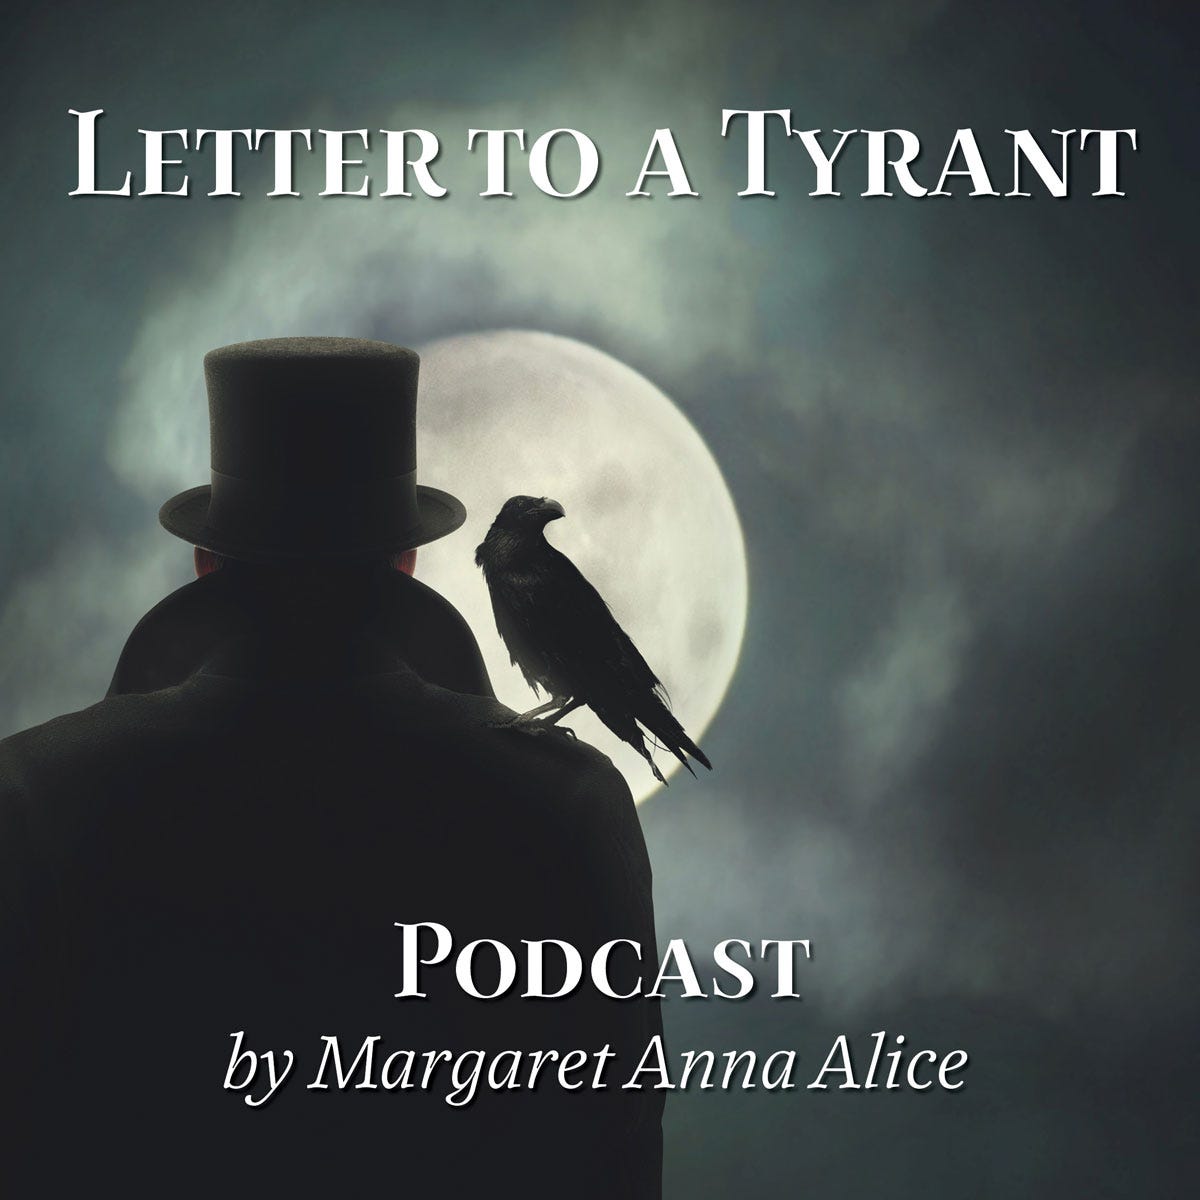 Letter to a Tyrant